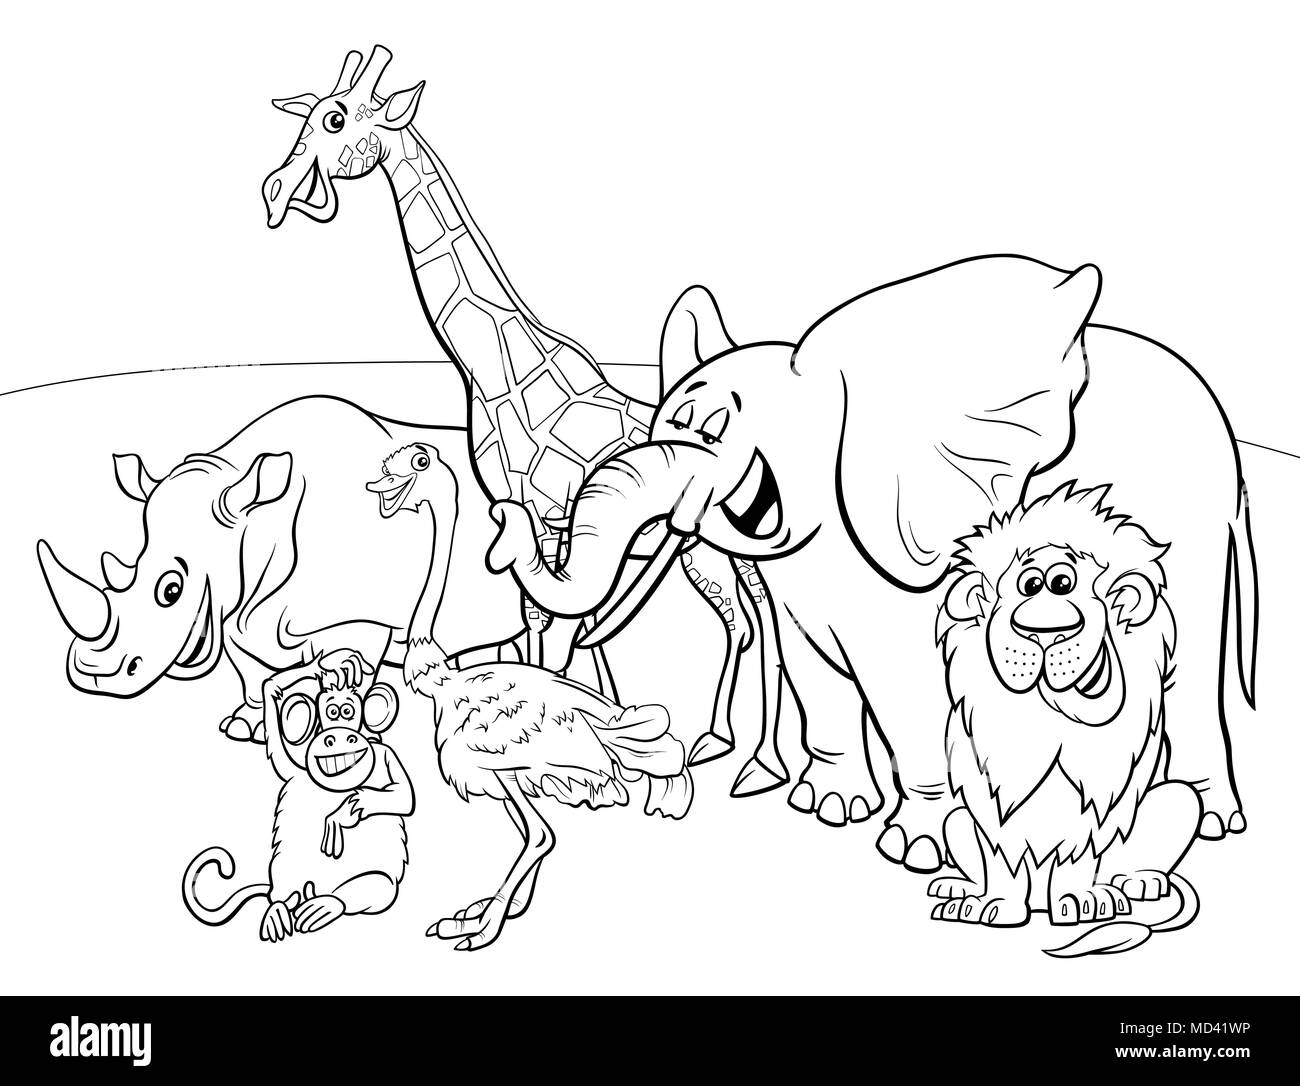 Black and White Cartoon Illustration of Wild Safari Animal Characters Group Coloring Book Stock Vector